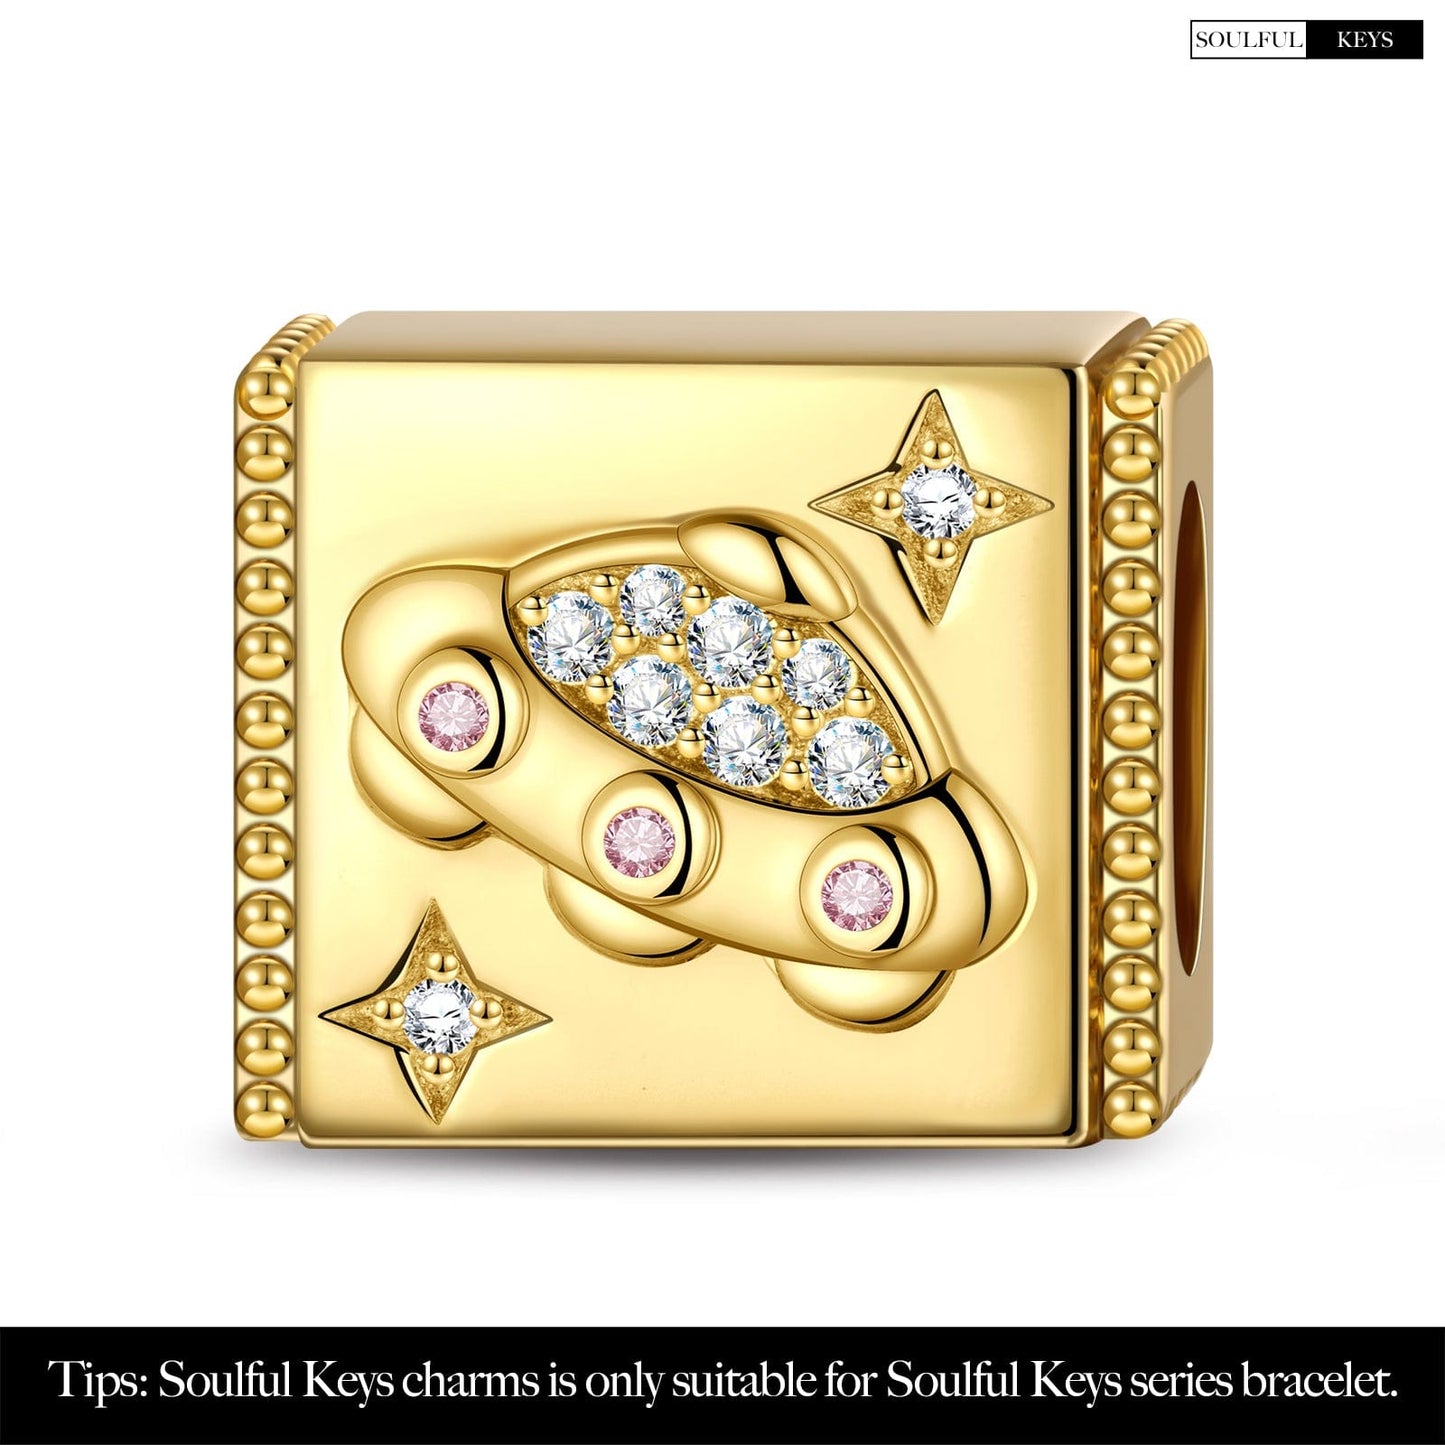 Spaceship Tarnish-resistant Silver Rectangular Charms In 14K Gold Plated